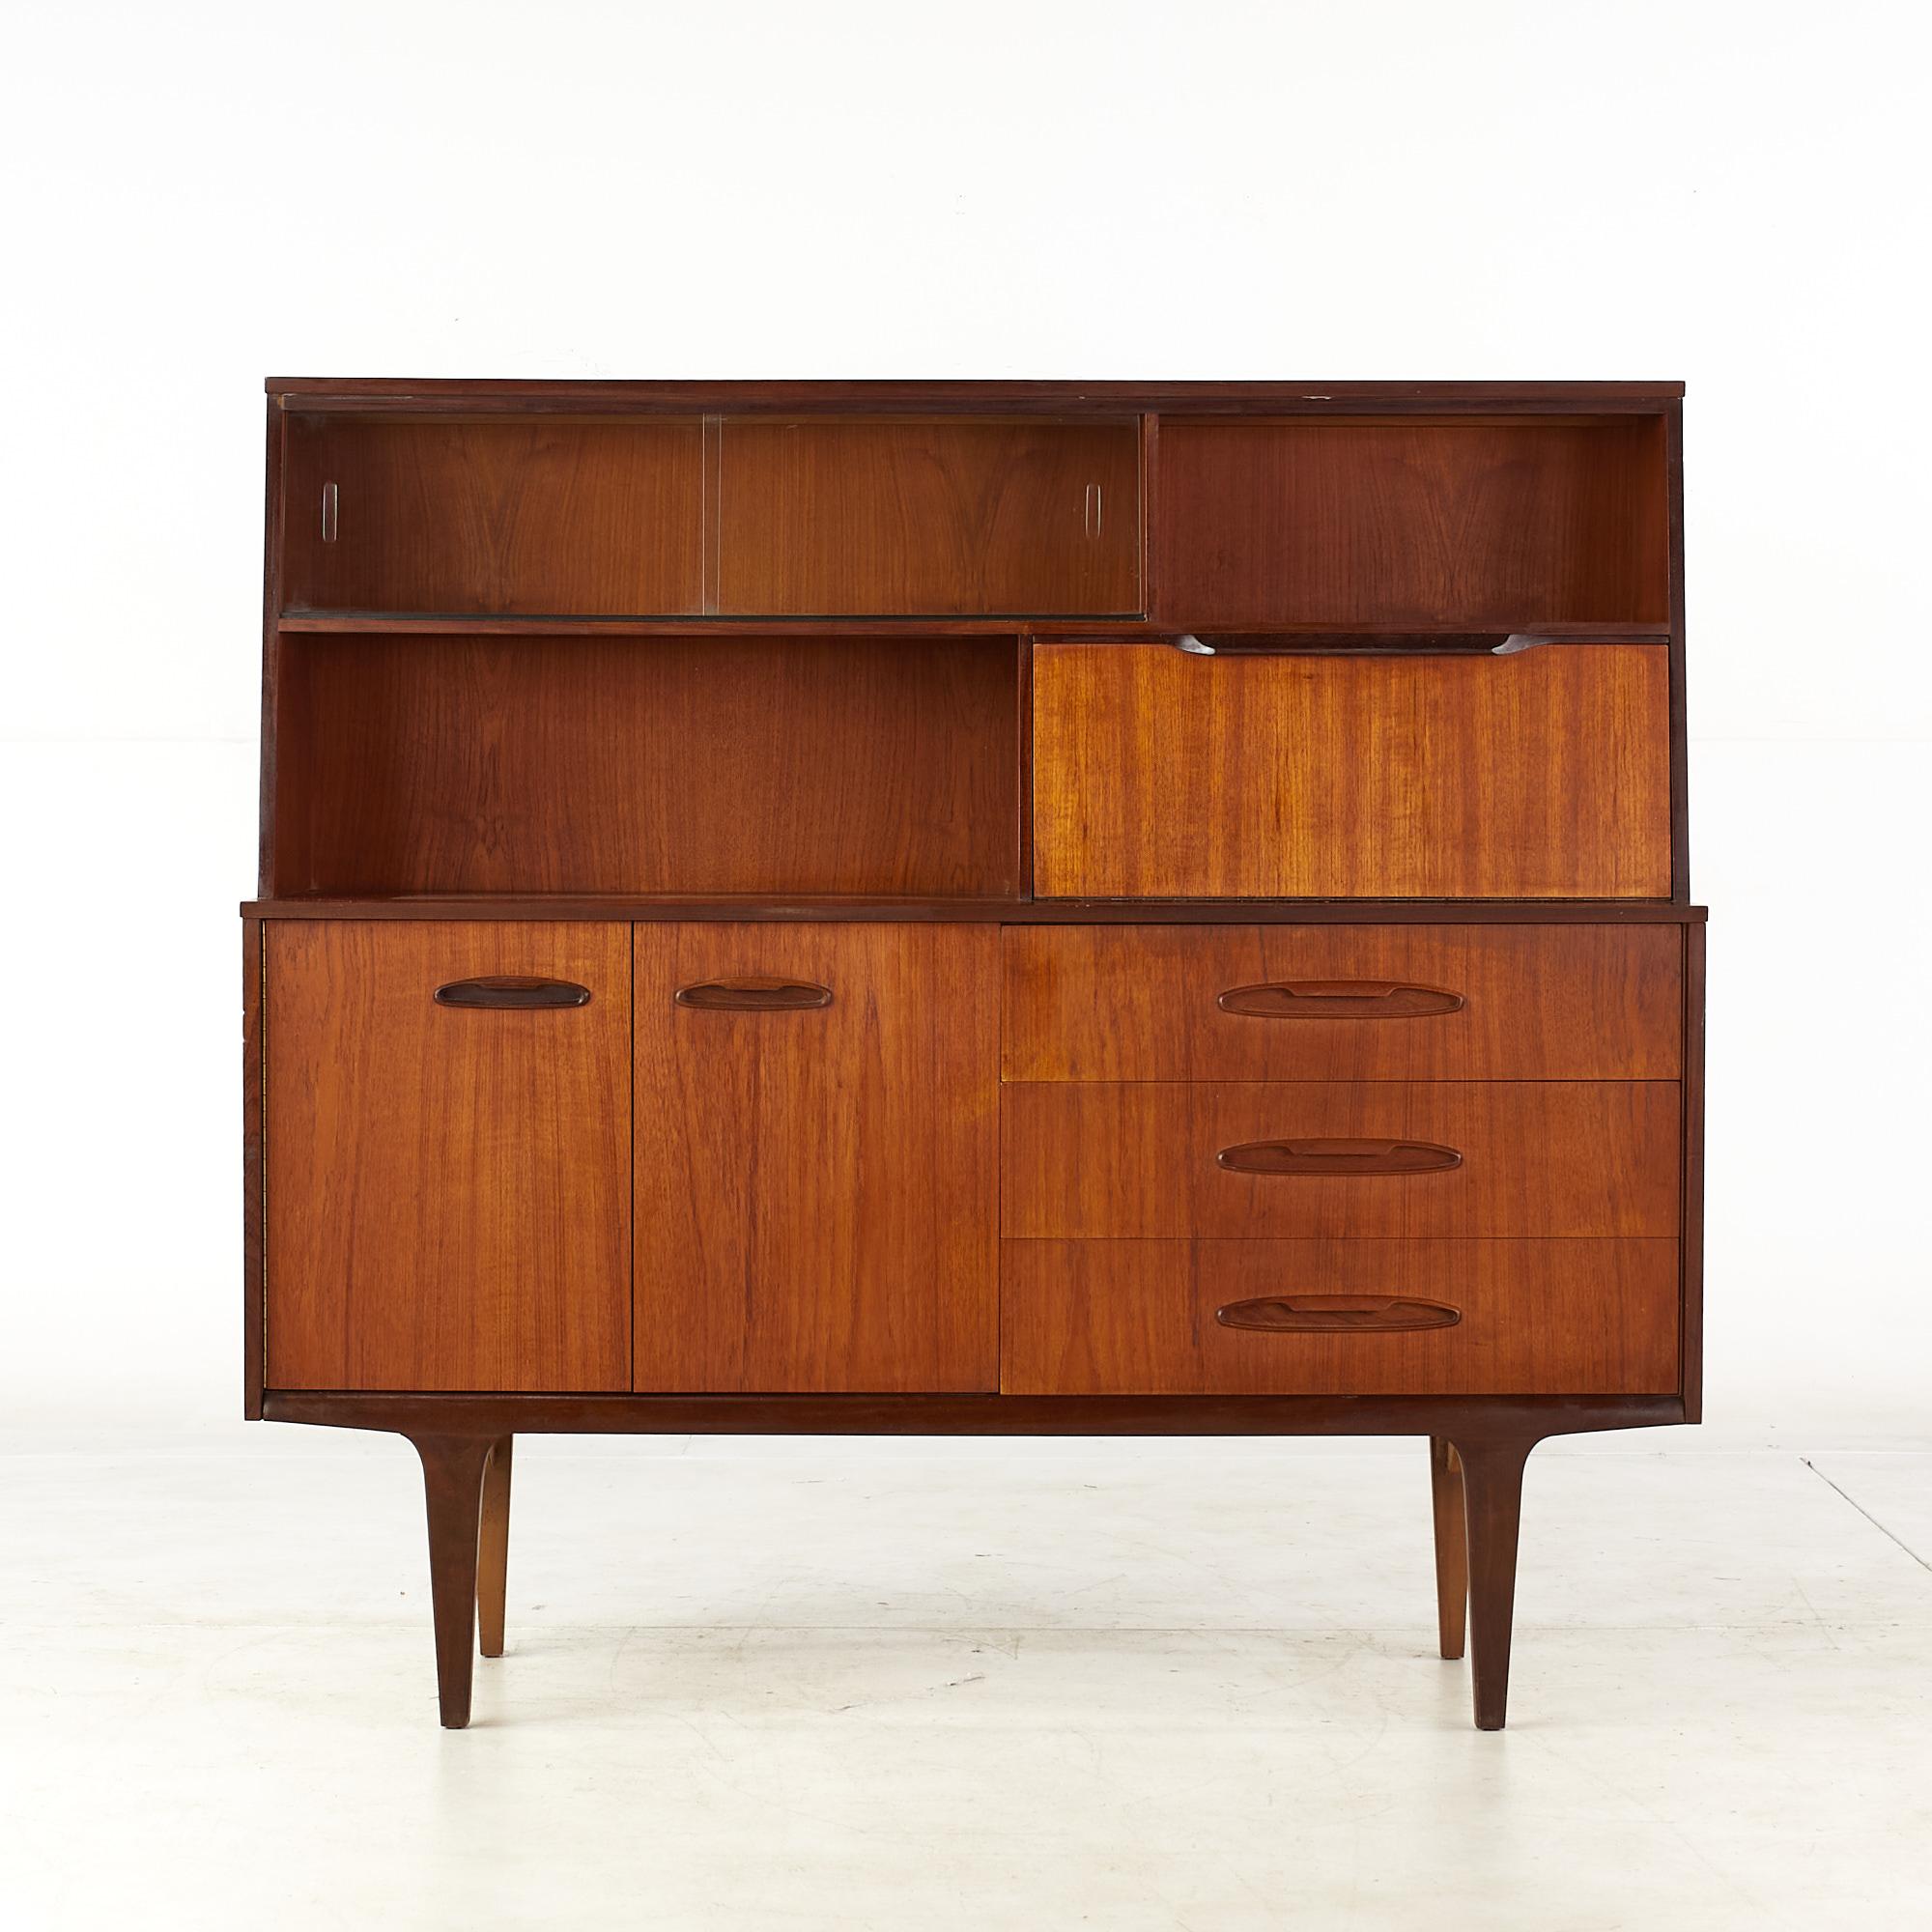 Mid Century teak sideboard

This sideboard measures: 54 wide x 16.25 deep x 50.25 inches high

All pieces of furniture can be had in what we call restored vintage condition. That means the piece is restored upon purchase so it’s free of